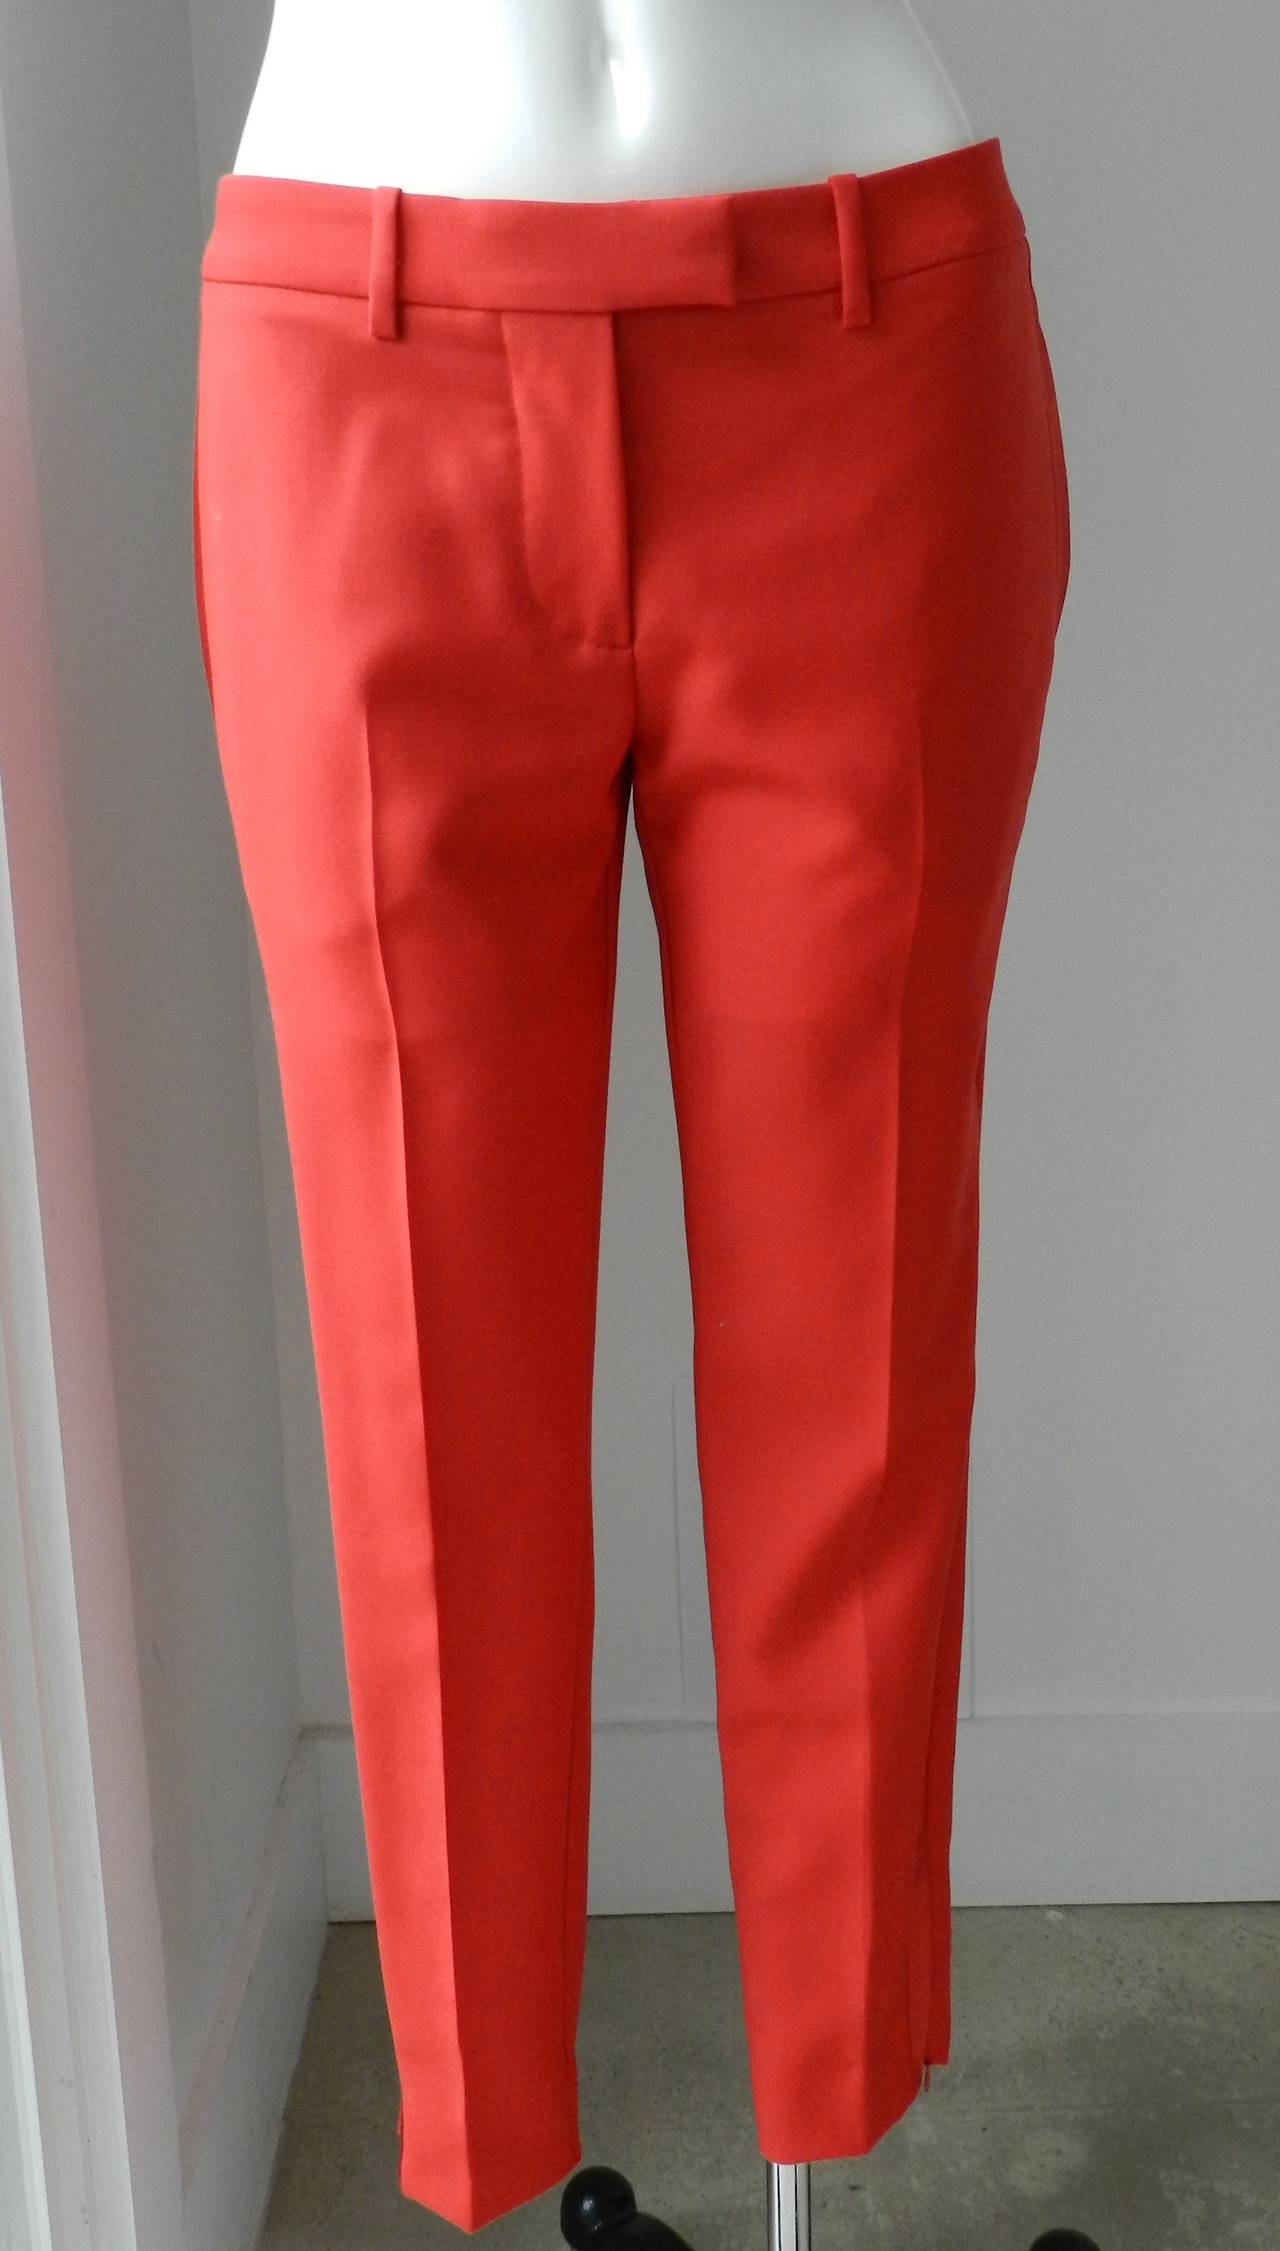 Maison Martin Margiela Wool and Satin Red Pant Suit 1